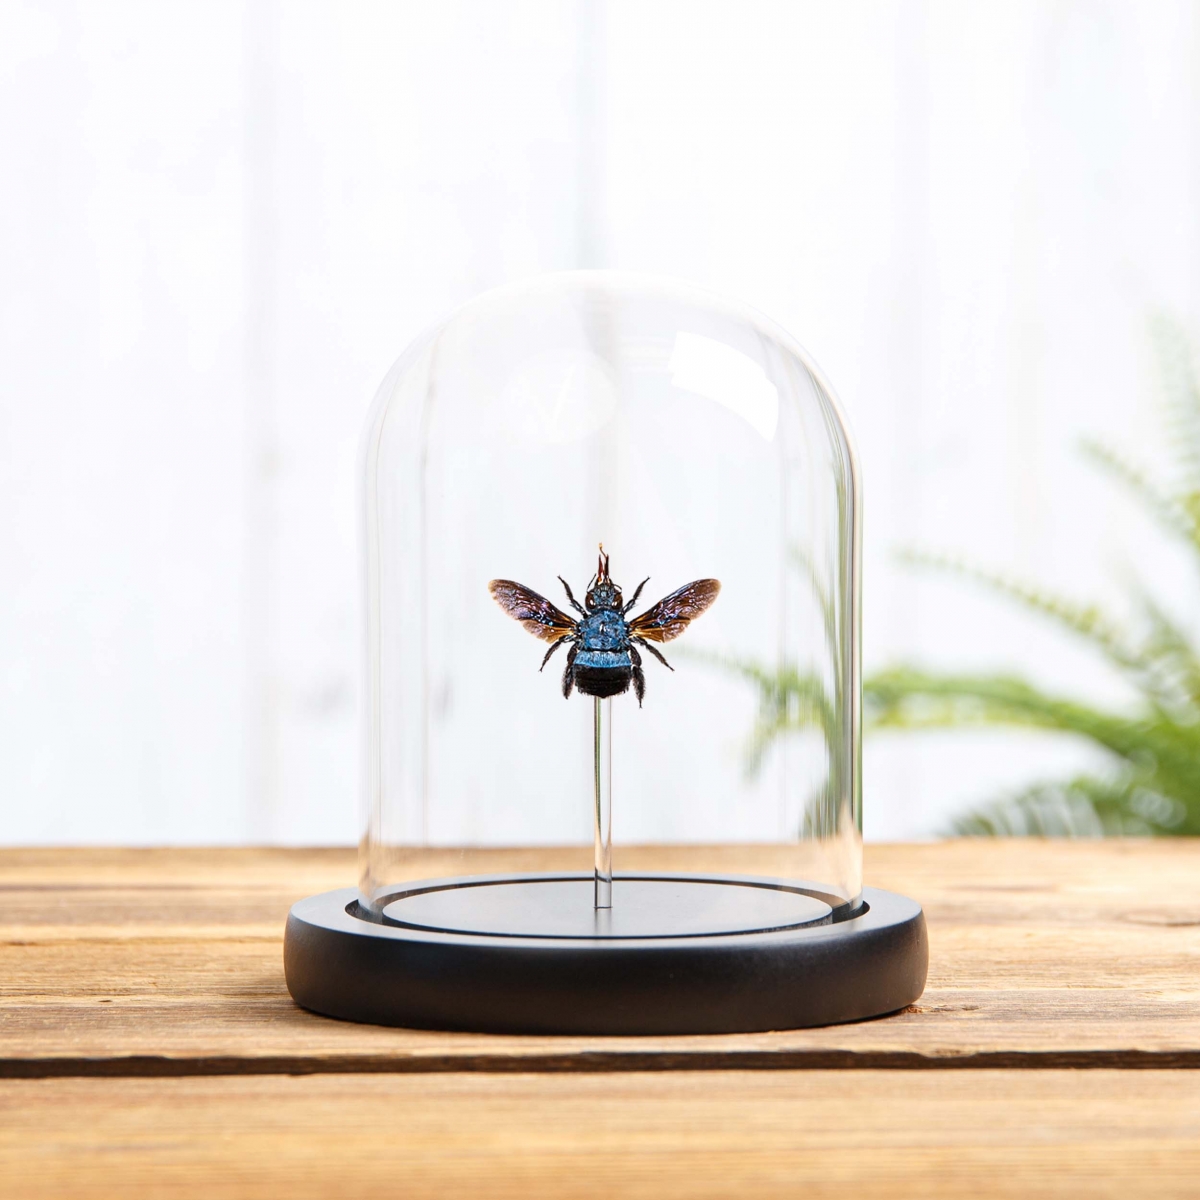 Minibeast The Blue Carpenter Bee in Glass Dome with Wooden Base (Xylocopa caerulea)